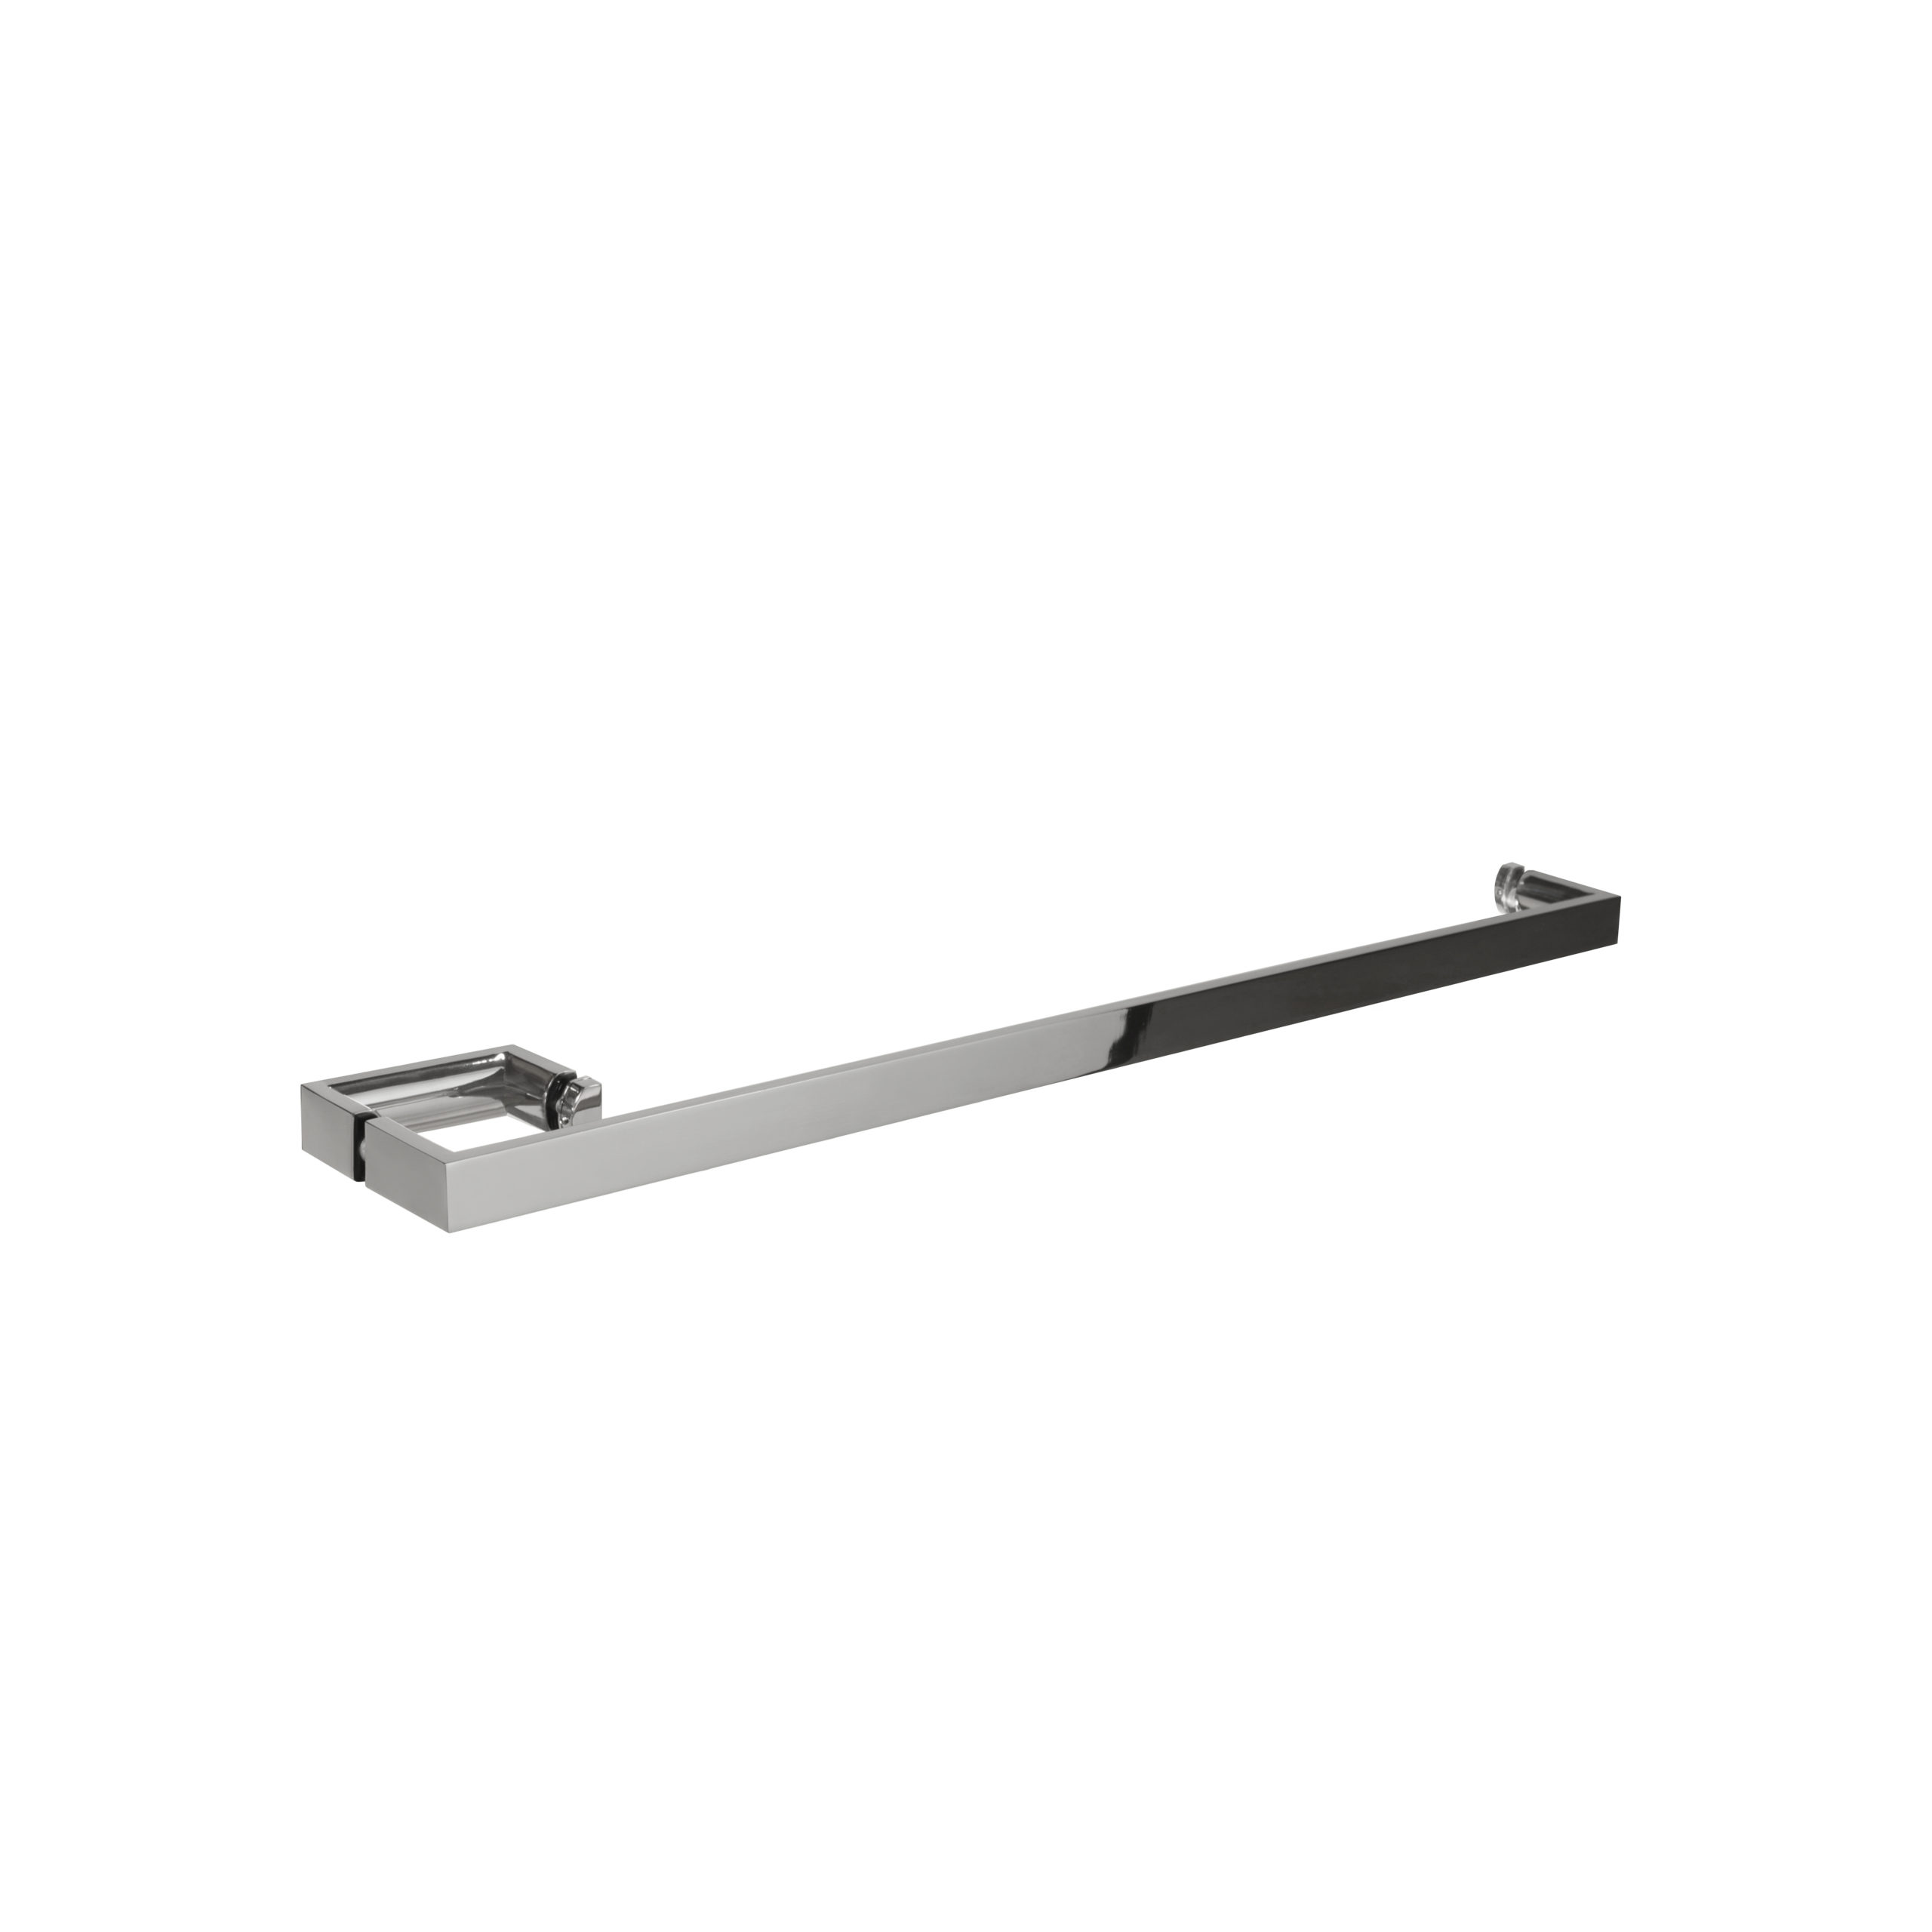 Polished stainless steel modern door handle and d pull - towel bar - product featured image - 24 inch length - product SKU IU 502-4 PSS